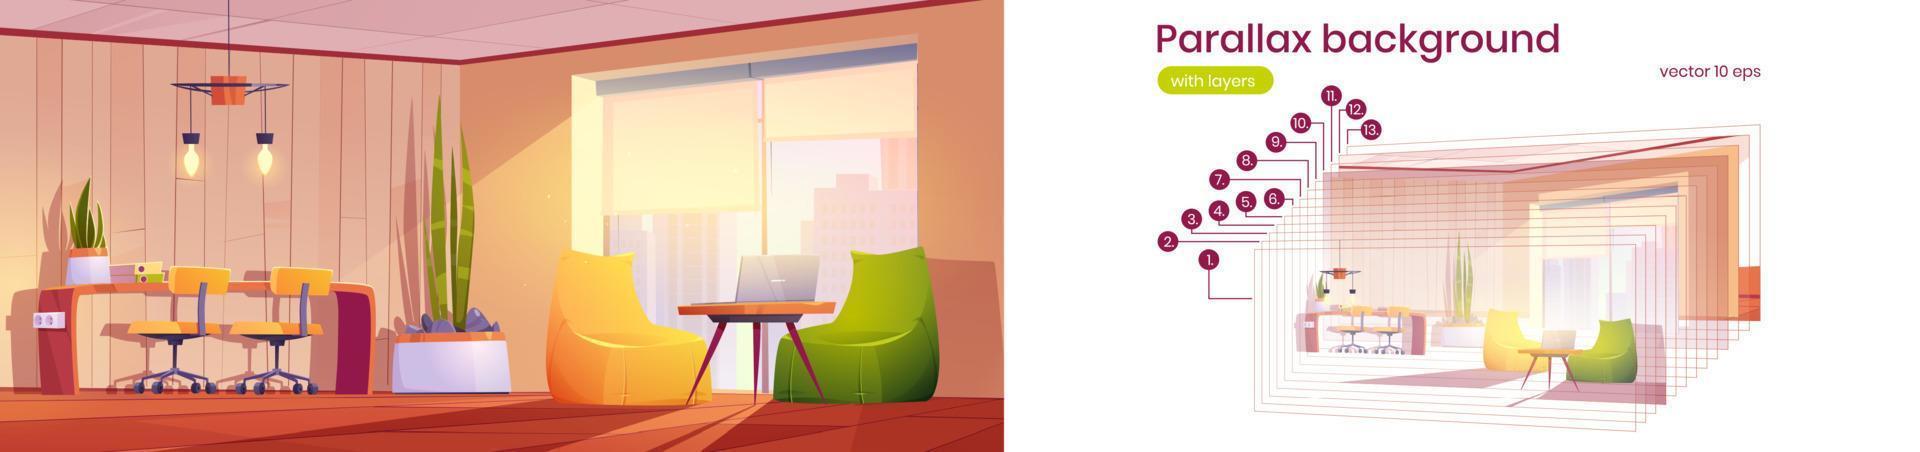 Parallax background coworking or home office 2d vector